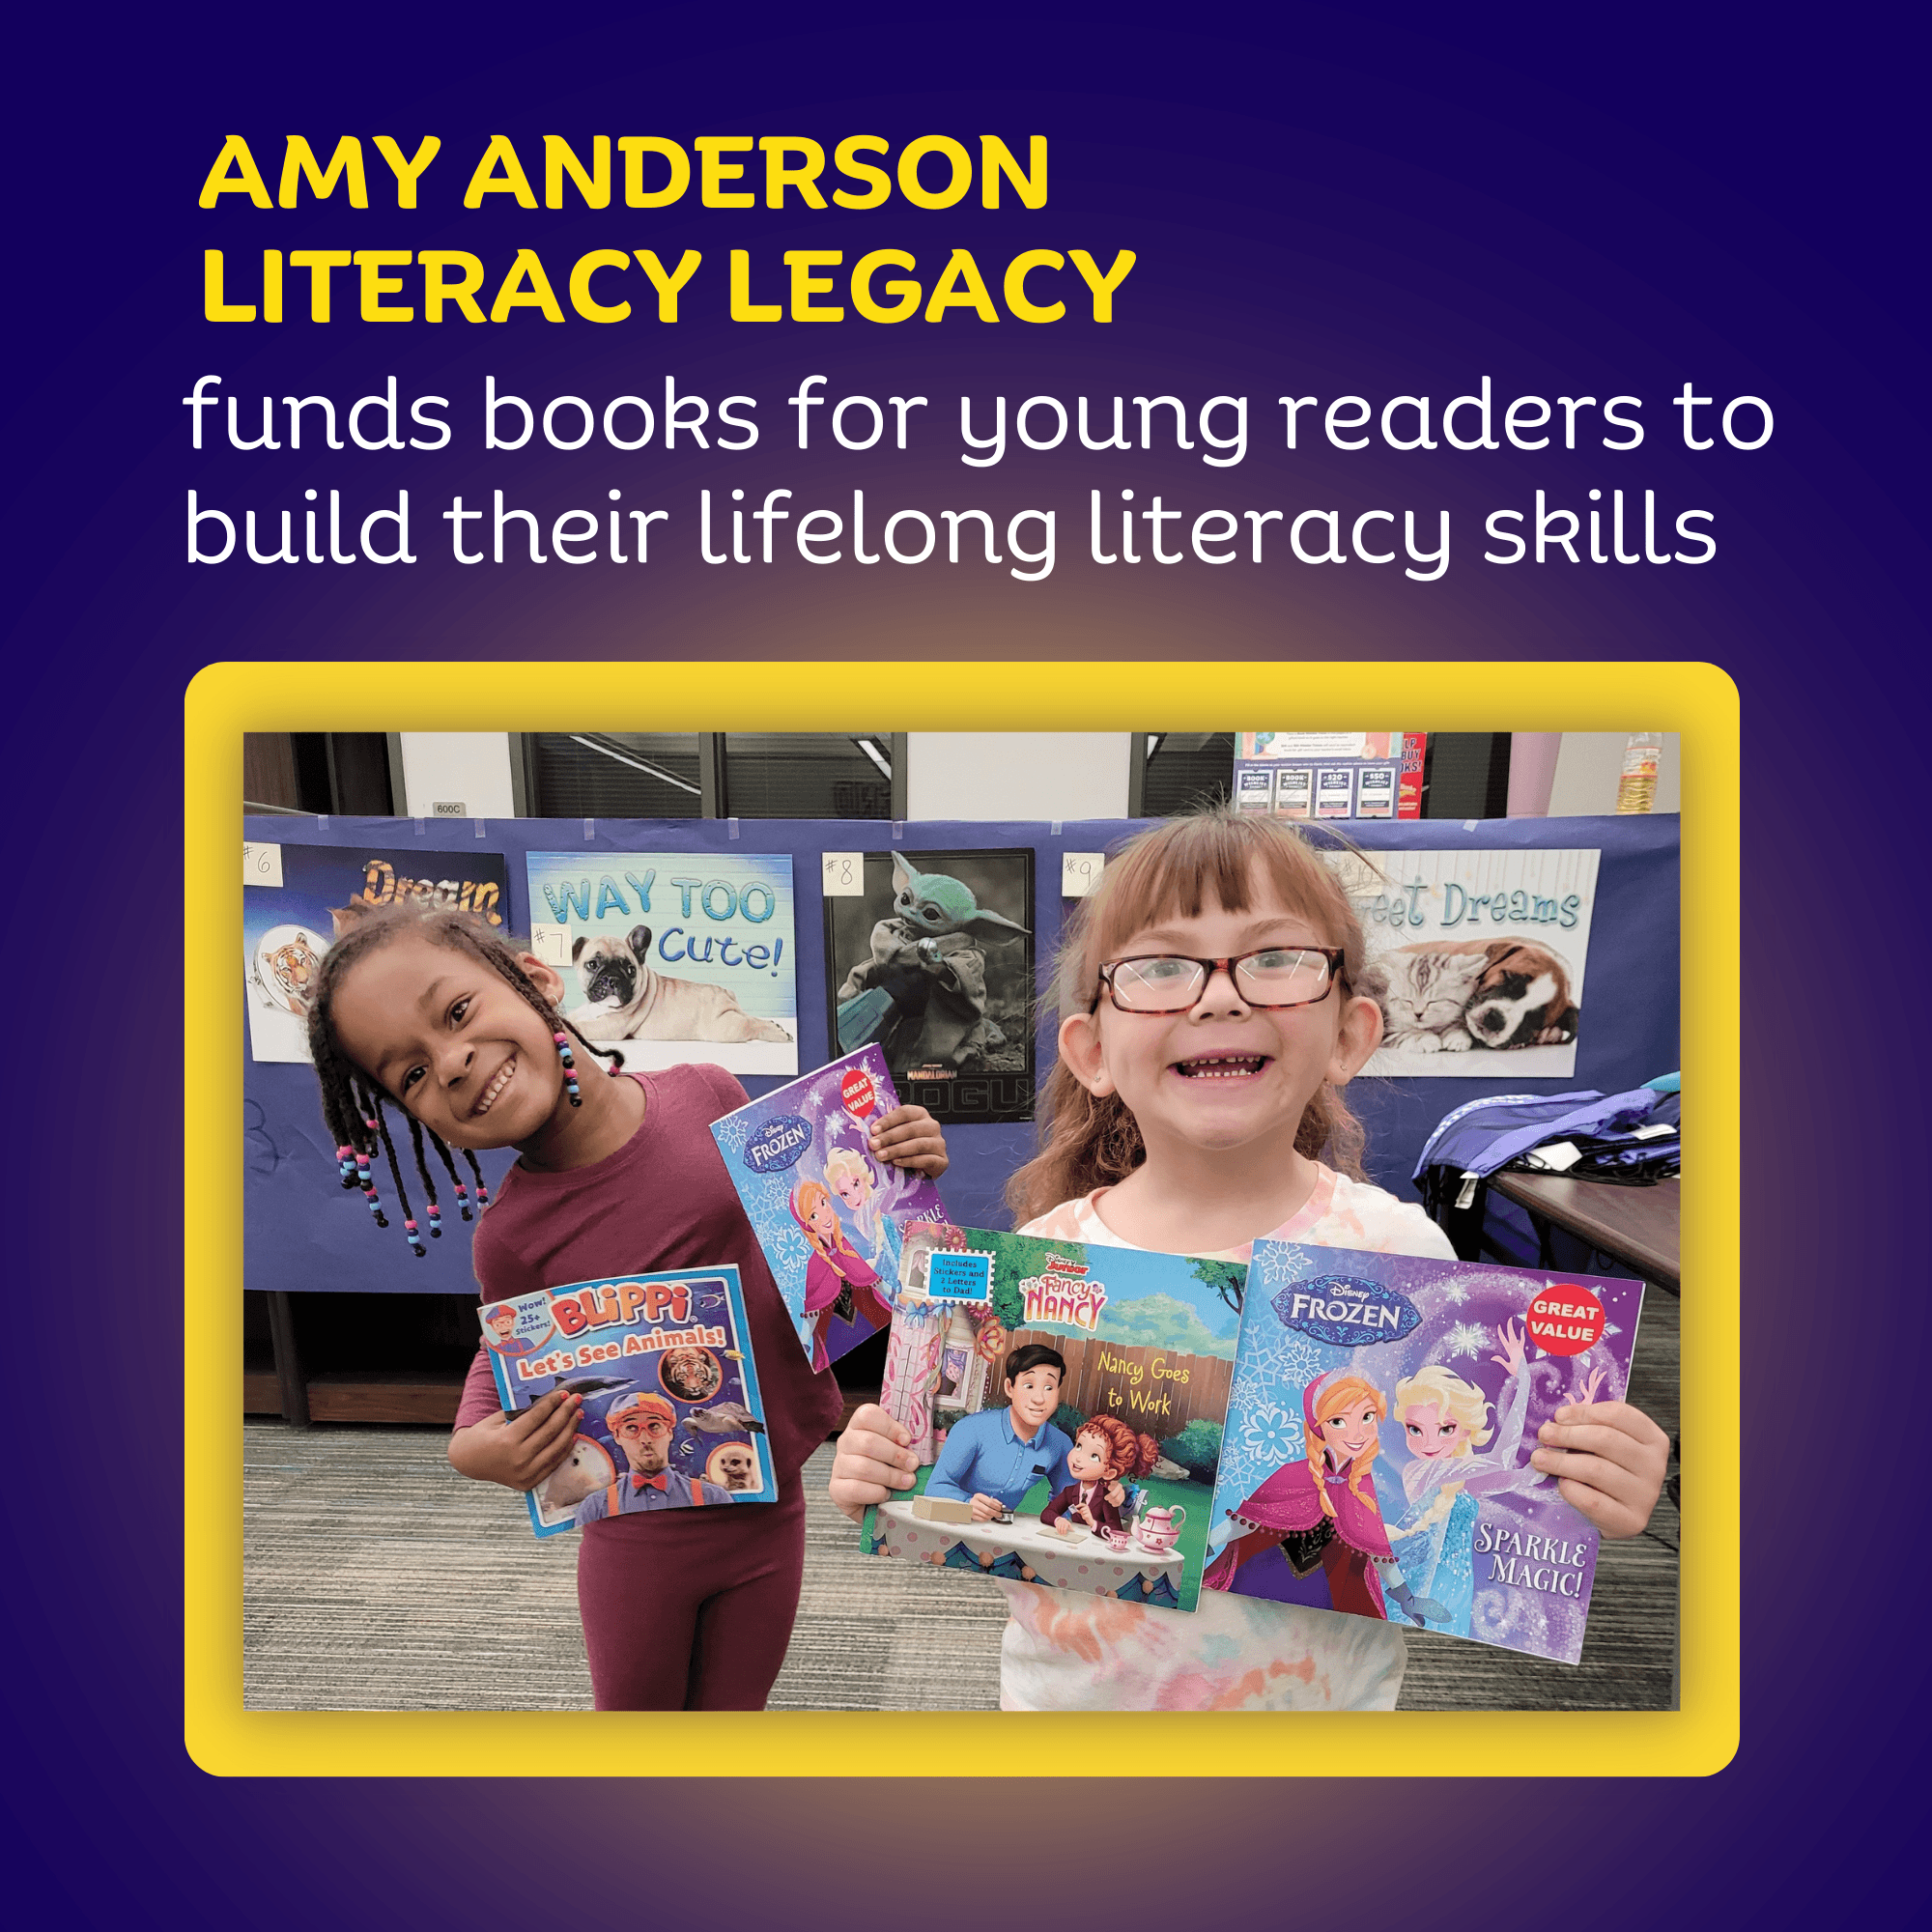 AMY ANDERSON LITERACY LEGACY